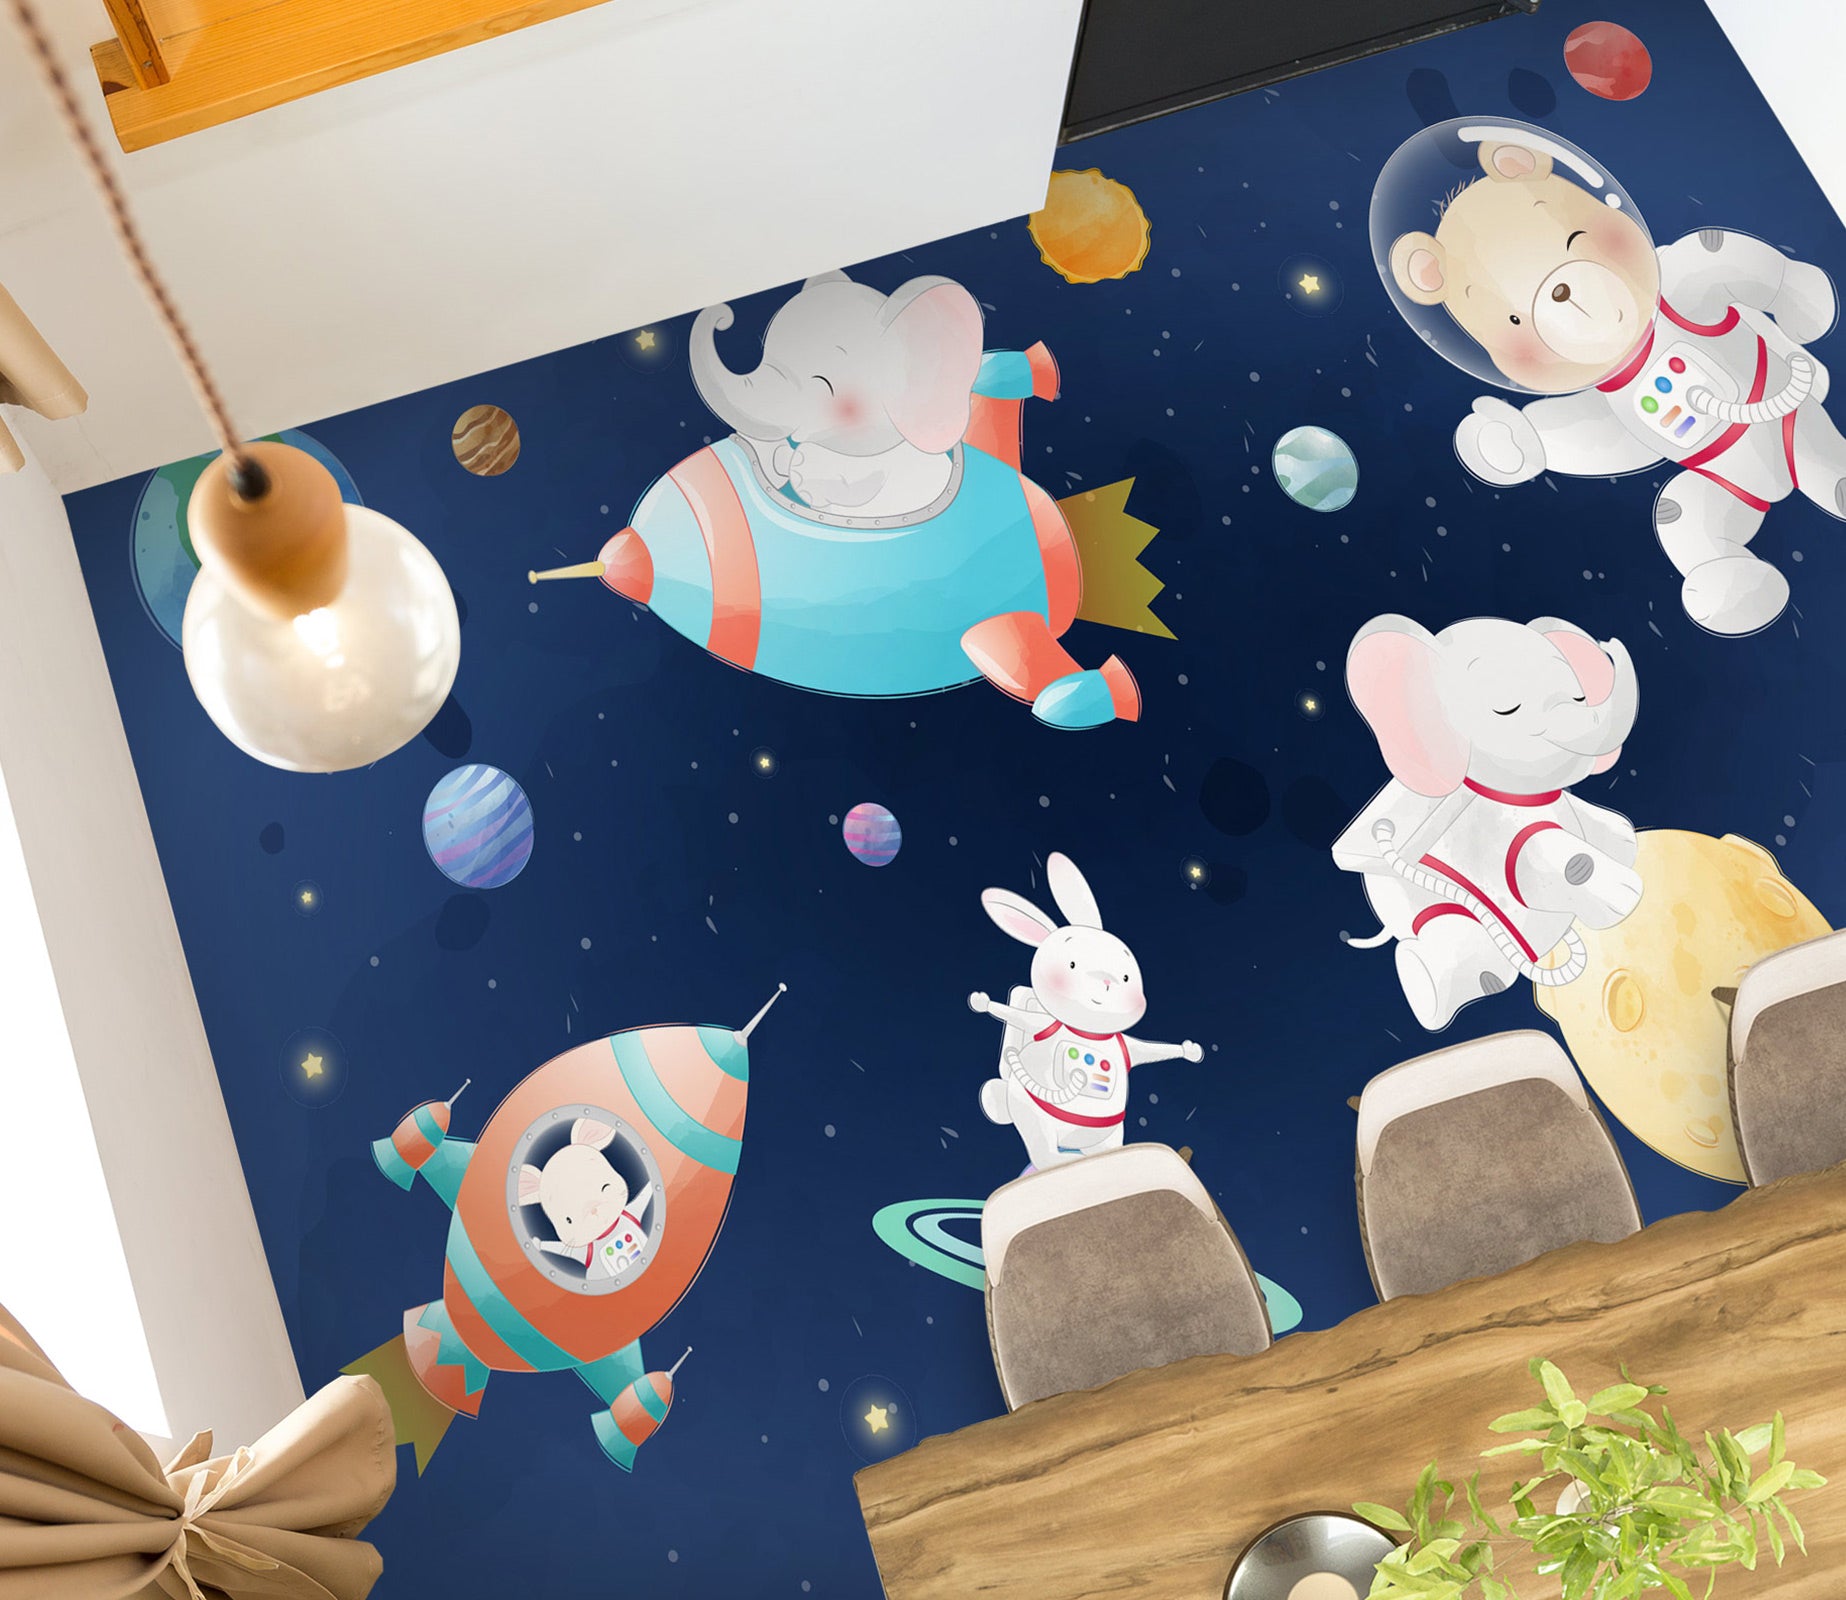 3D Space Animals 1125 Floor Mural  Wallpaper Murals Self-Adhesive Removable Print Epoxy